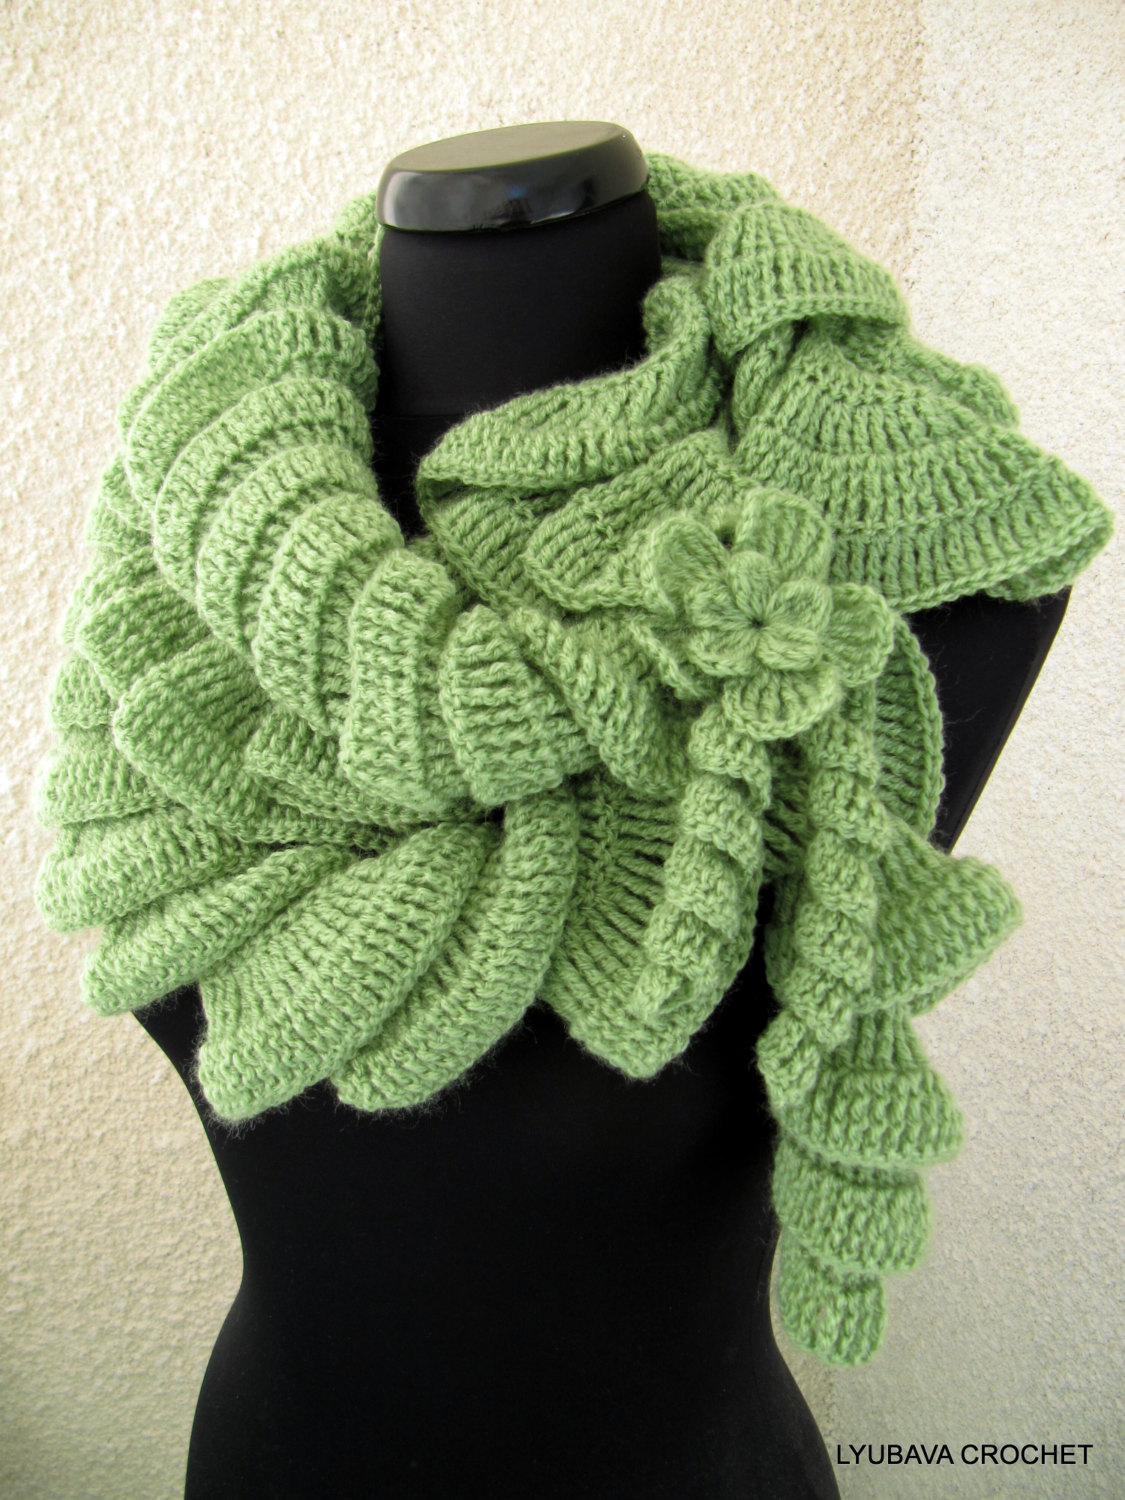 How To Knit A Ruffle Scarf Free Pattern 9 Crochet Patterns For Scarves Free Fiber Flux Free Crochet